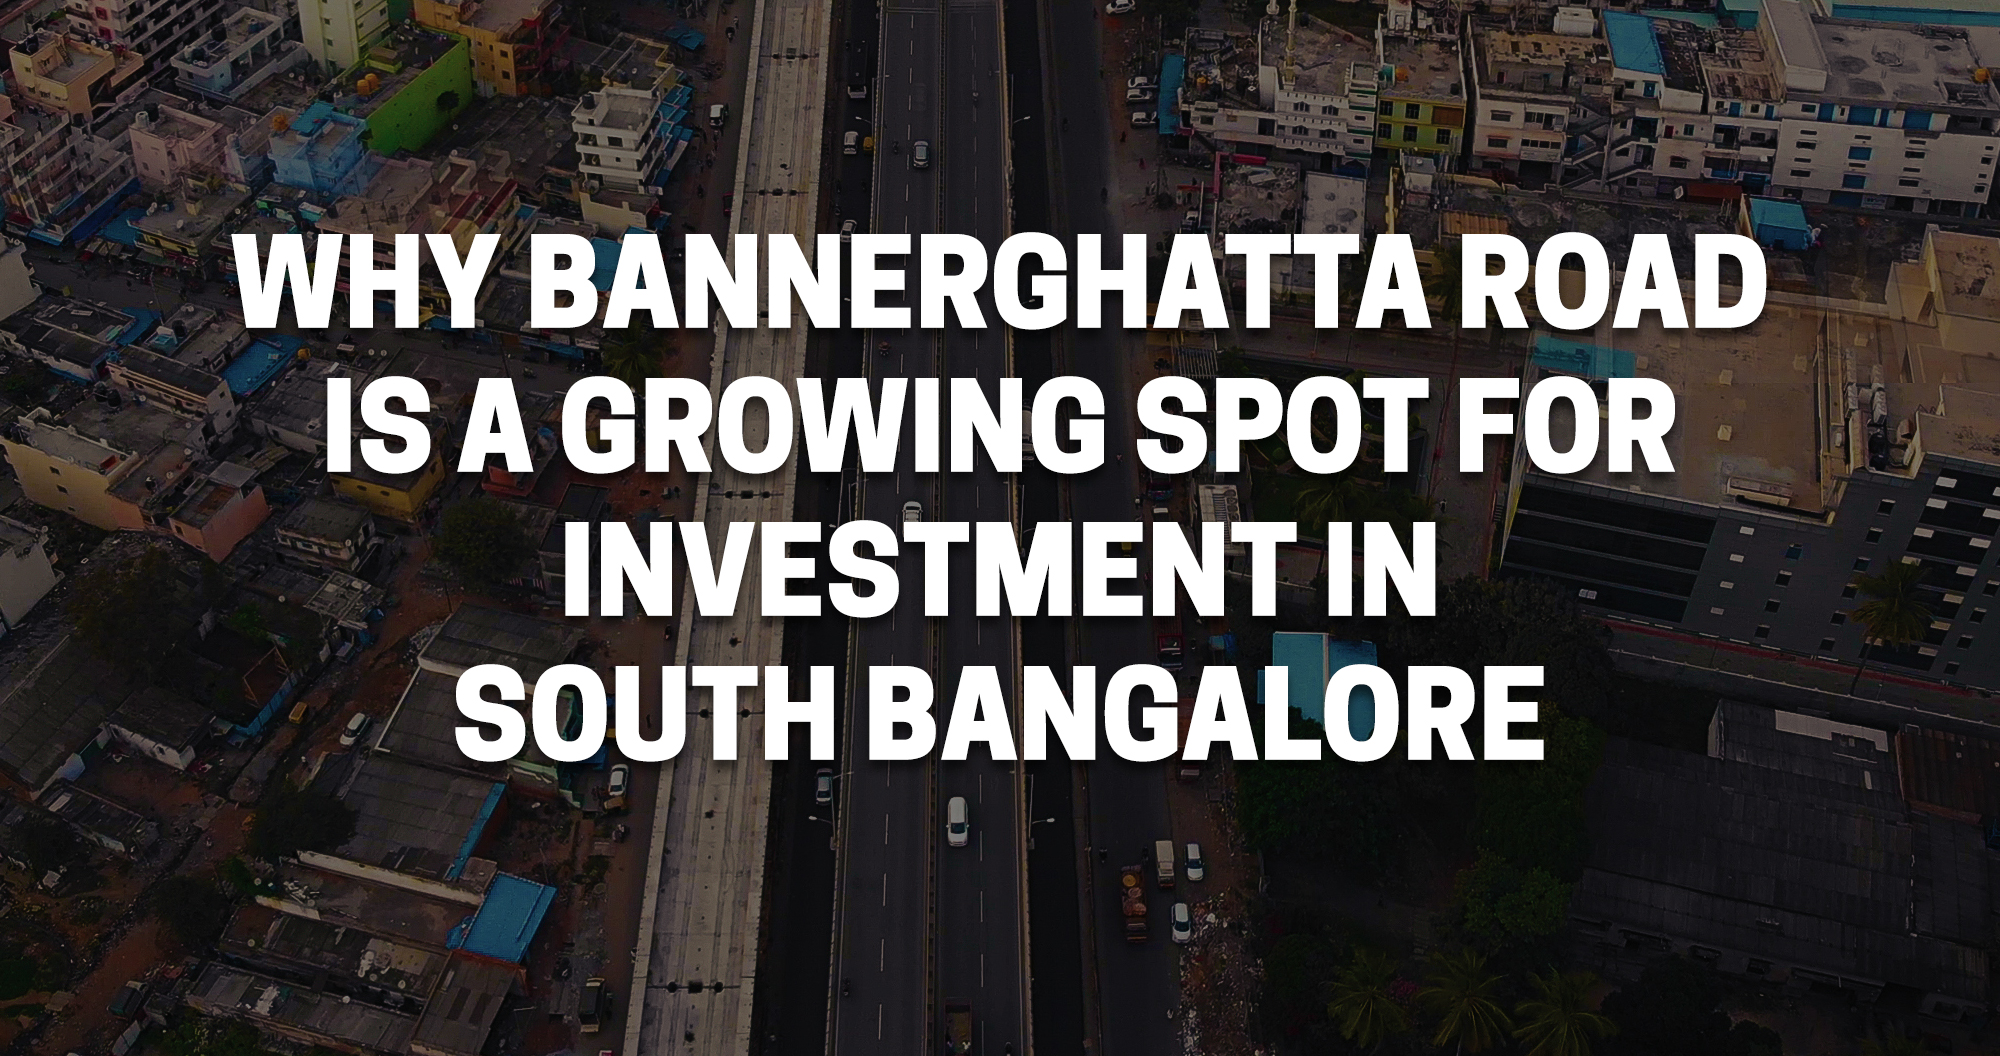 Why Bannerghatta Road is a growing spot for investment in South Bangalore